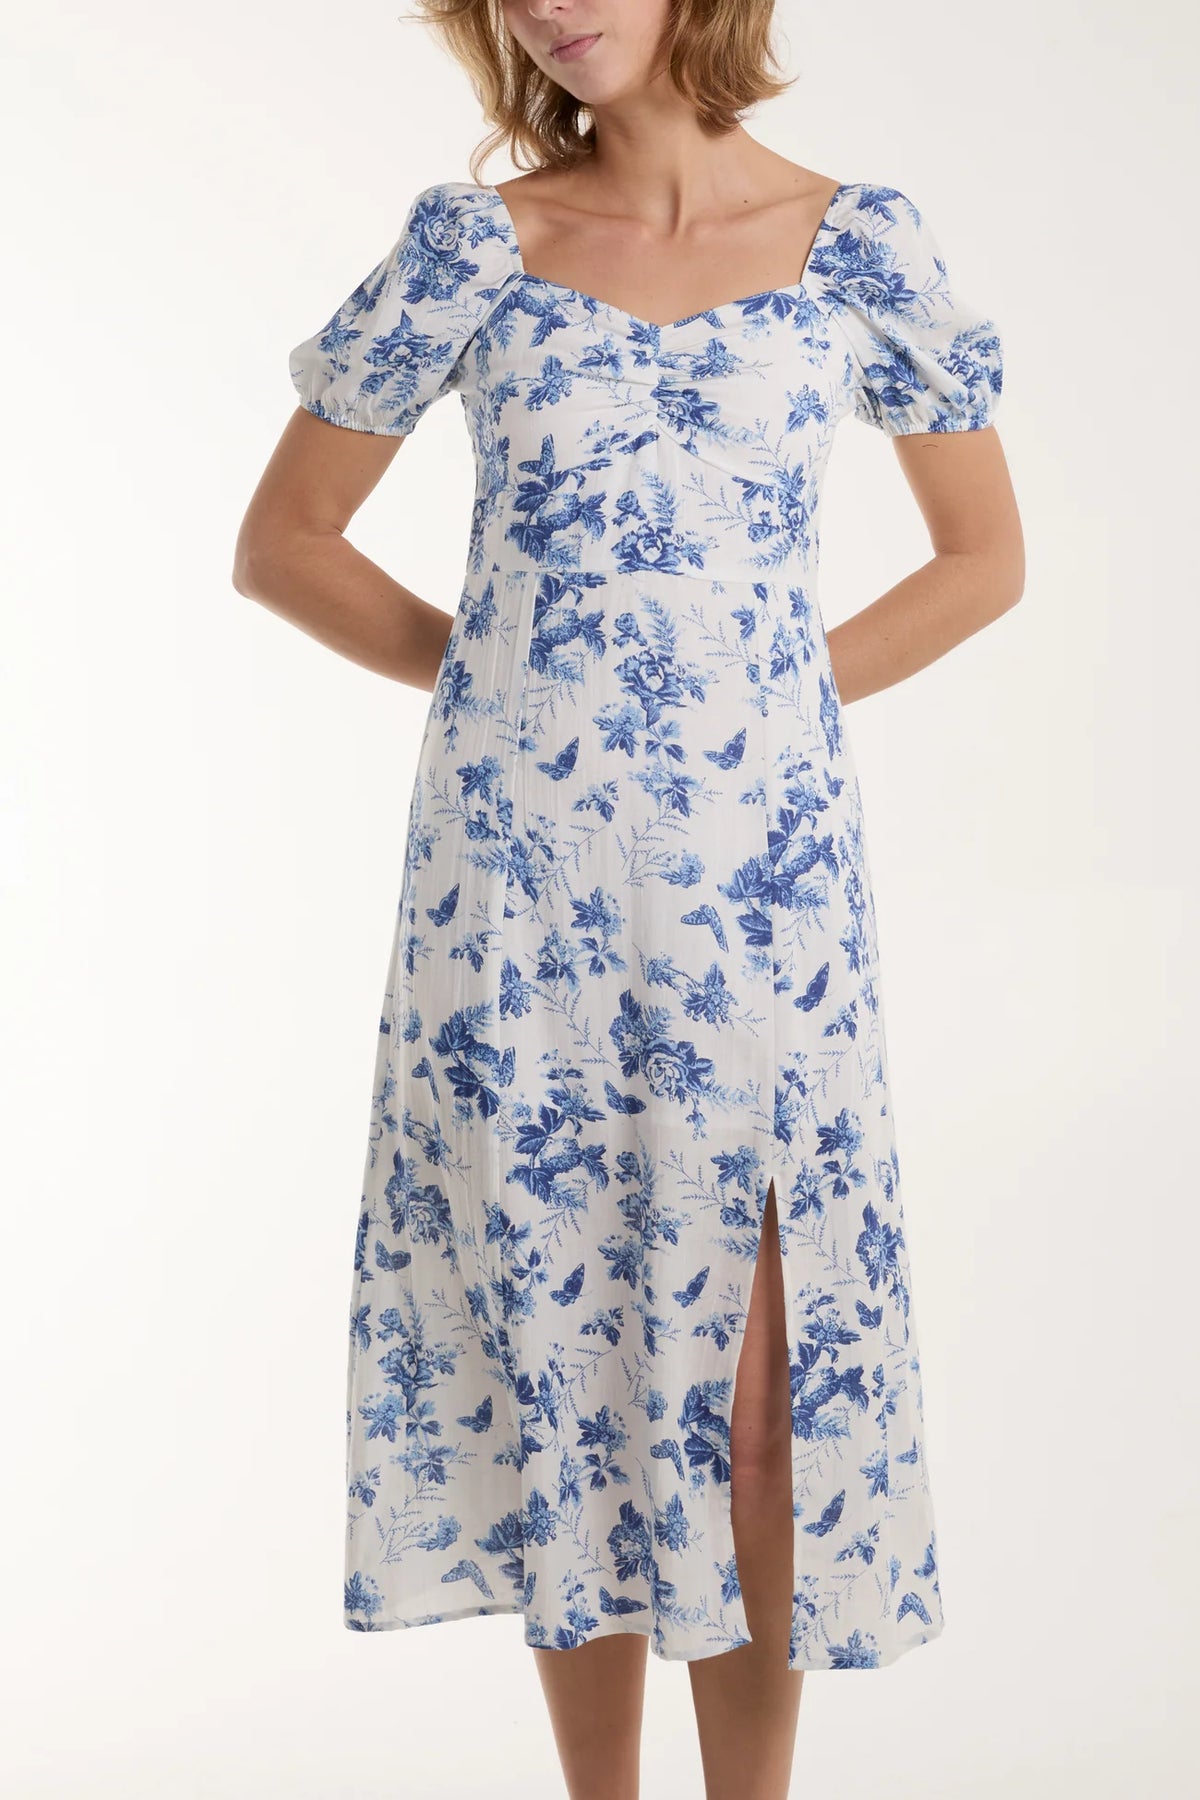 Love-my-apparel-blue-and-white-printed-sweetheart-dress